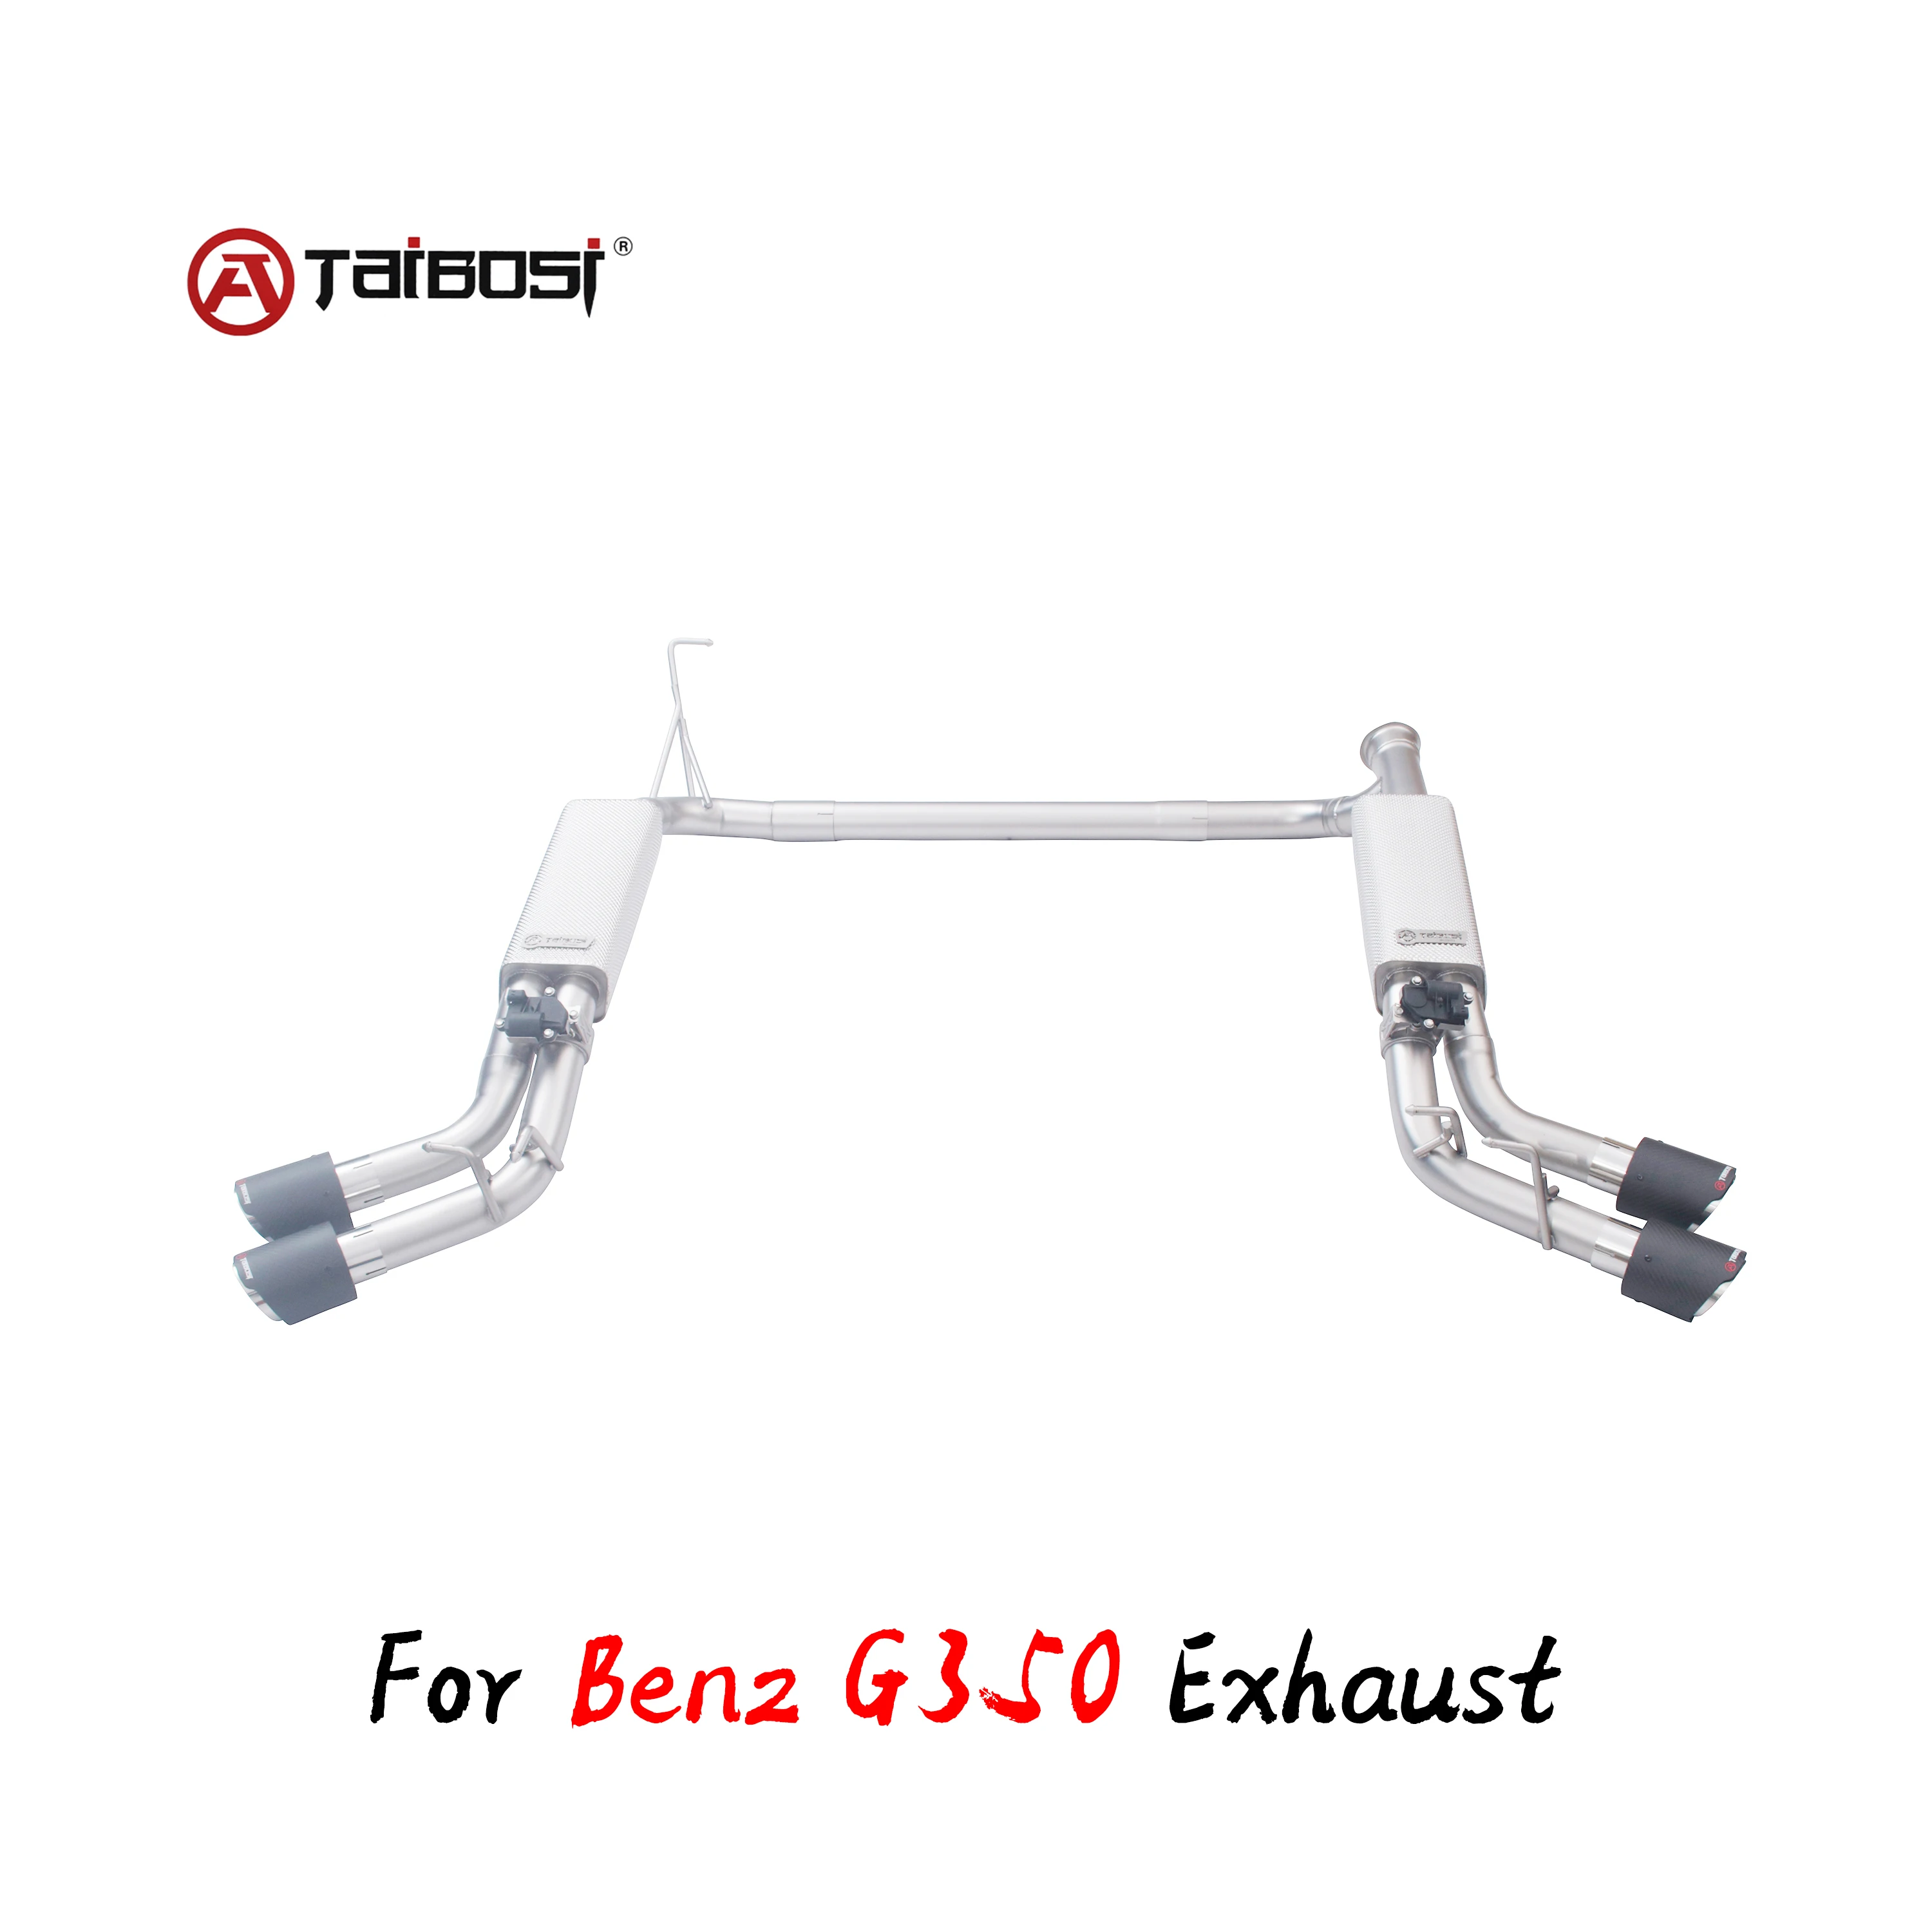 

For Mercedes Benz G350 2.0T Exhaust System Catback Taibosi Performance Vacuum Electric Valve Car Muffler Cutout Tips Accessories